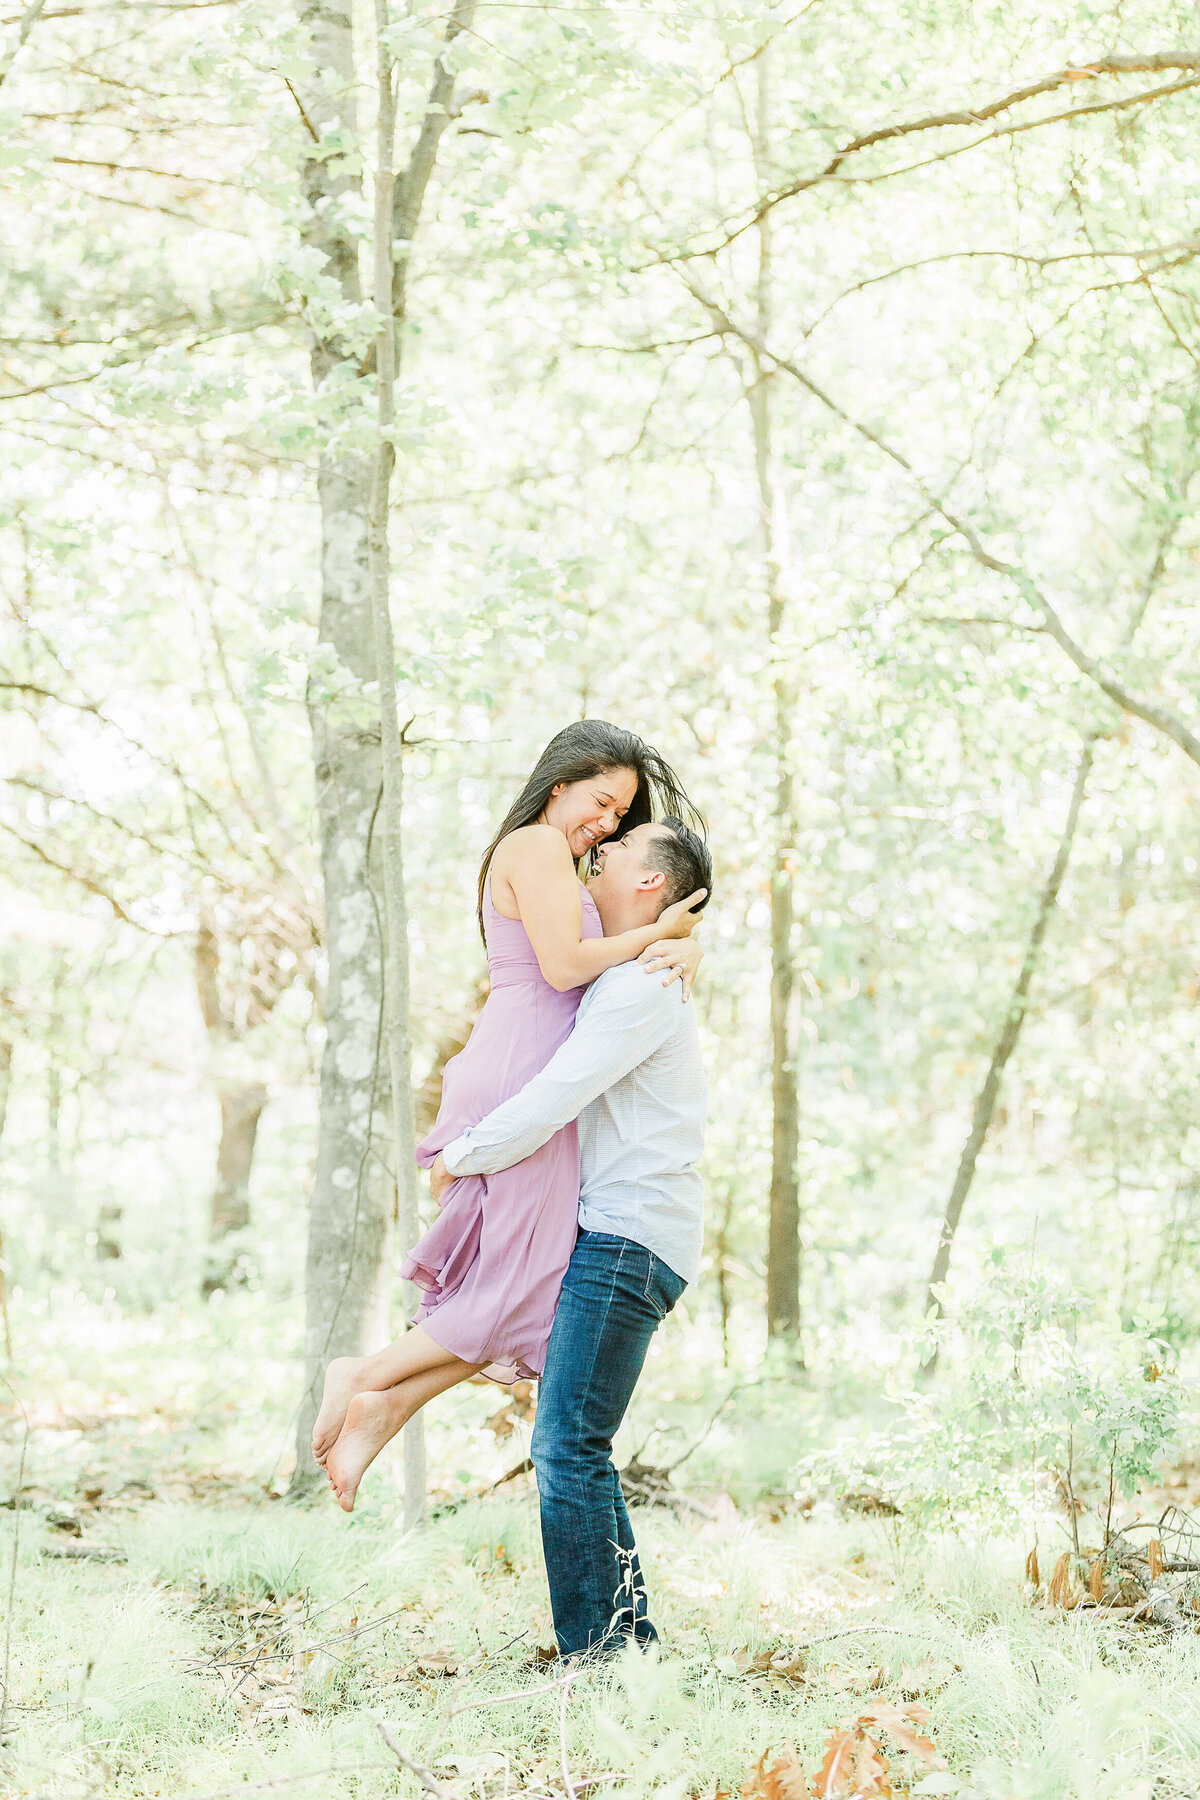 A man picks up his fiance at their Reading Town Forest engagement photoshoot. The woman's arms are wrapped around the groom's neck and their faces are close together and looking at each other. Captured by best MA wedding photographer Lia Rose Weddings.